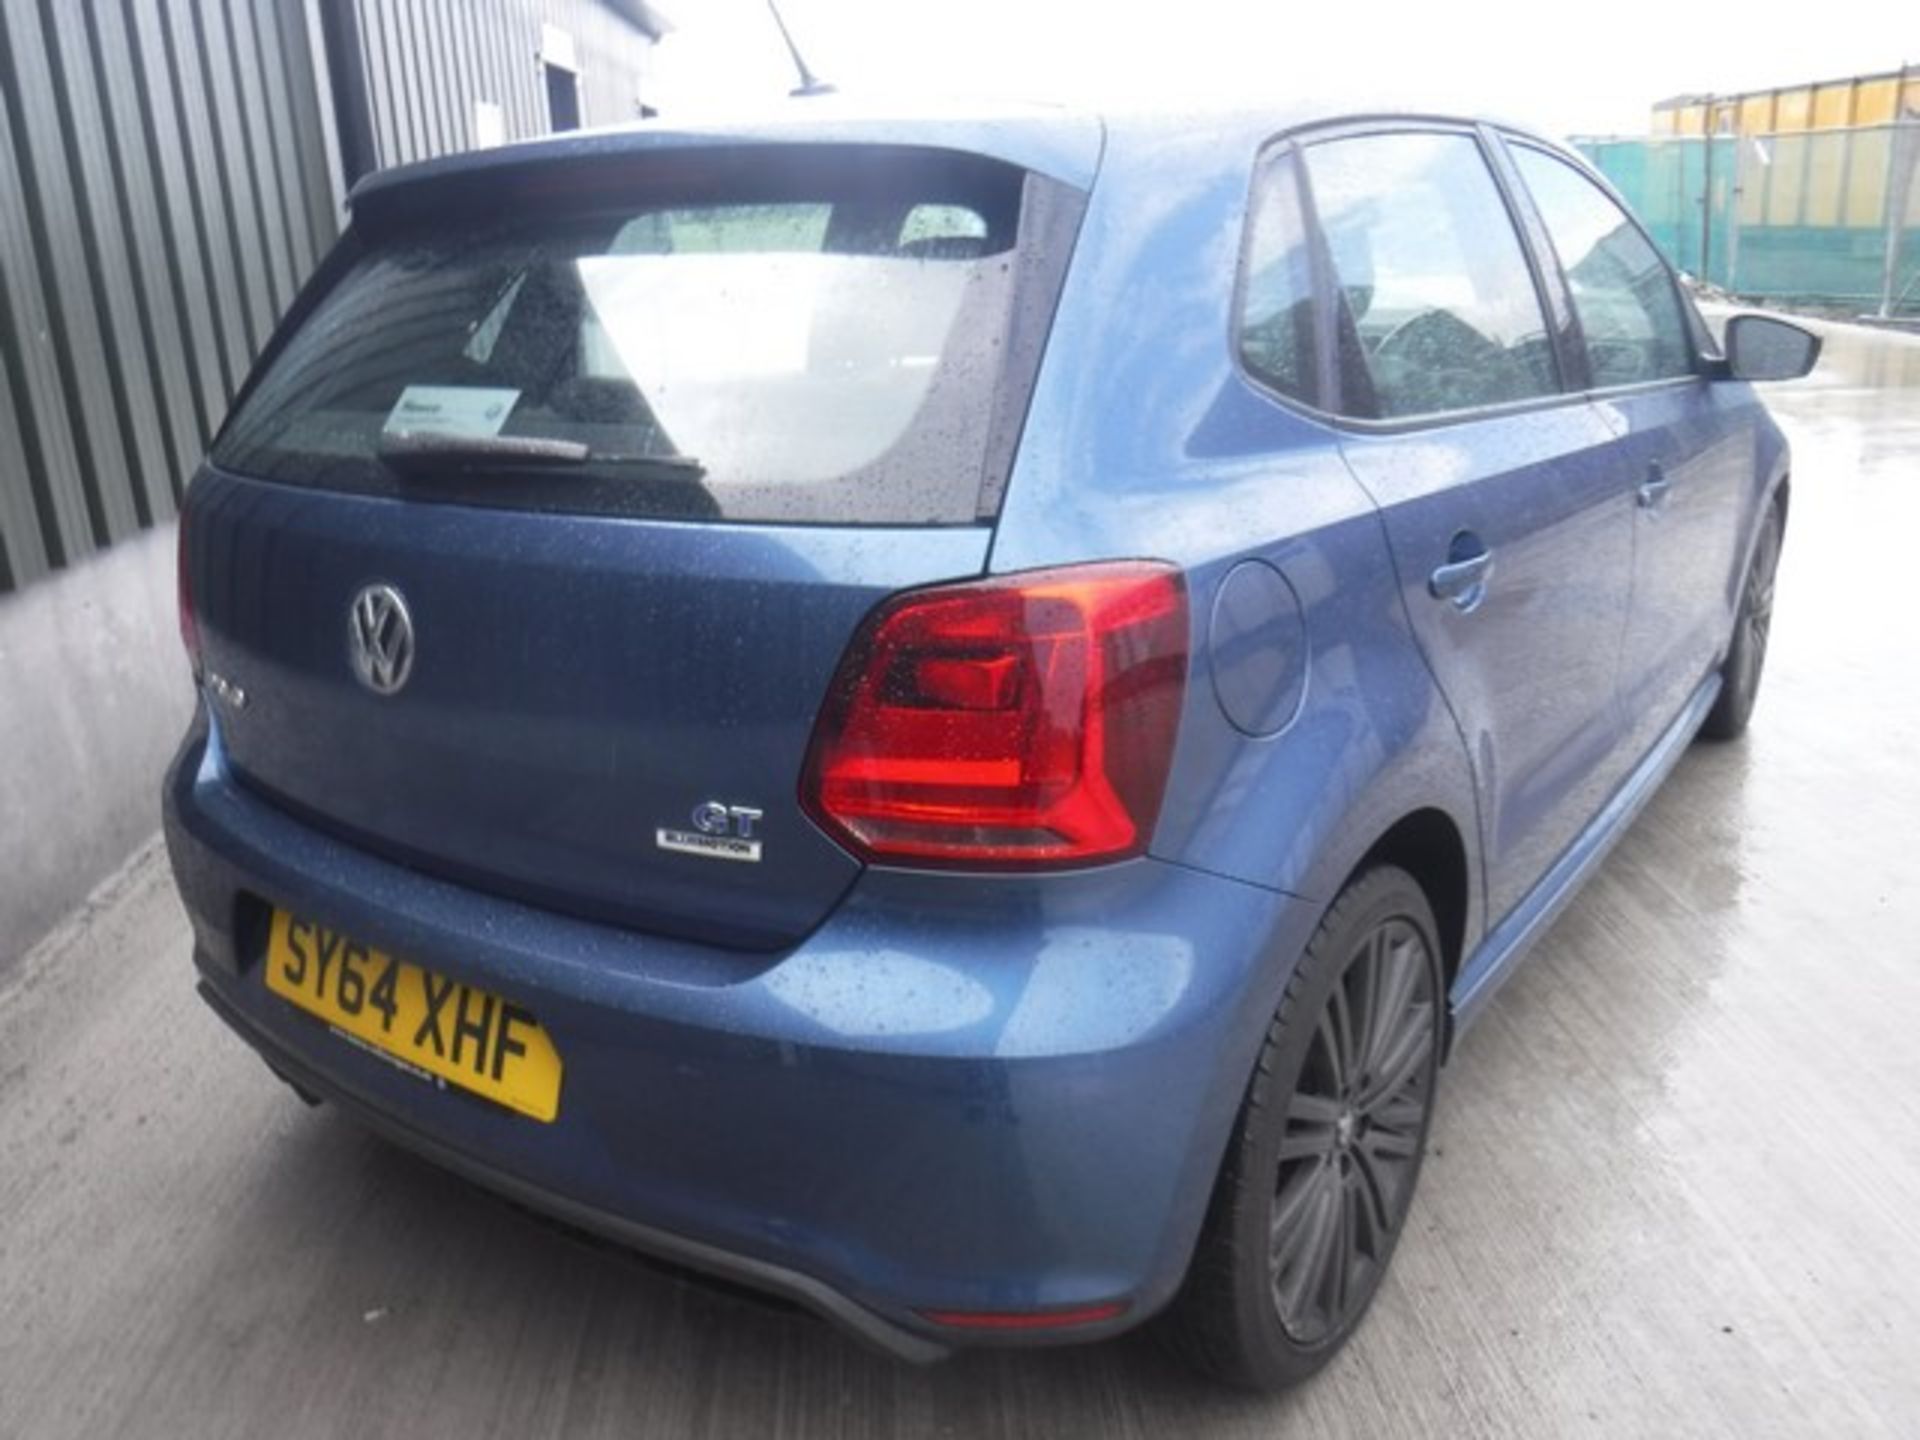 VOLKSWAGEN POLO BLUEGT - 1395cc - Image 7 of 8